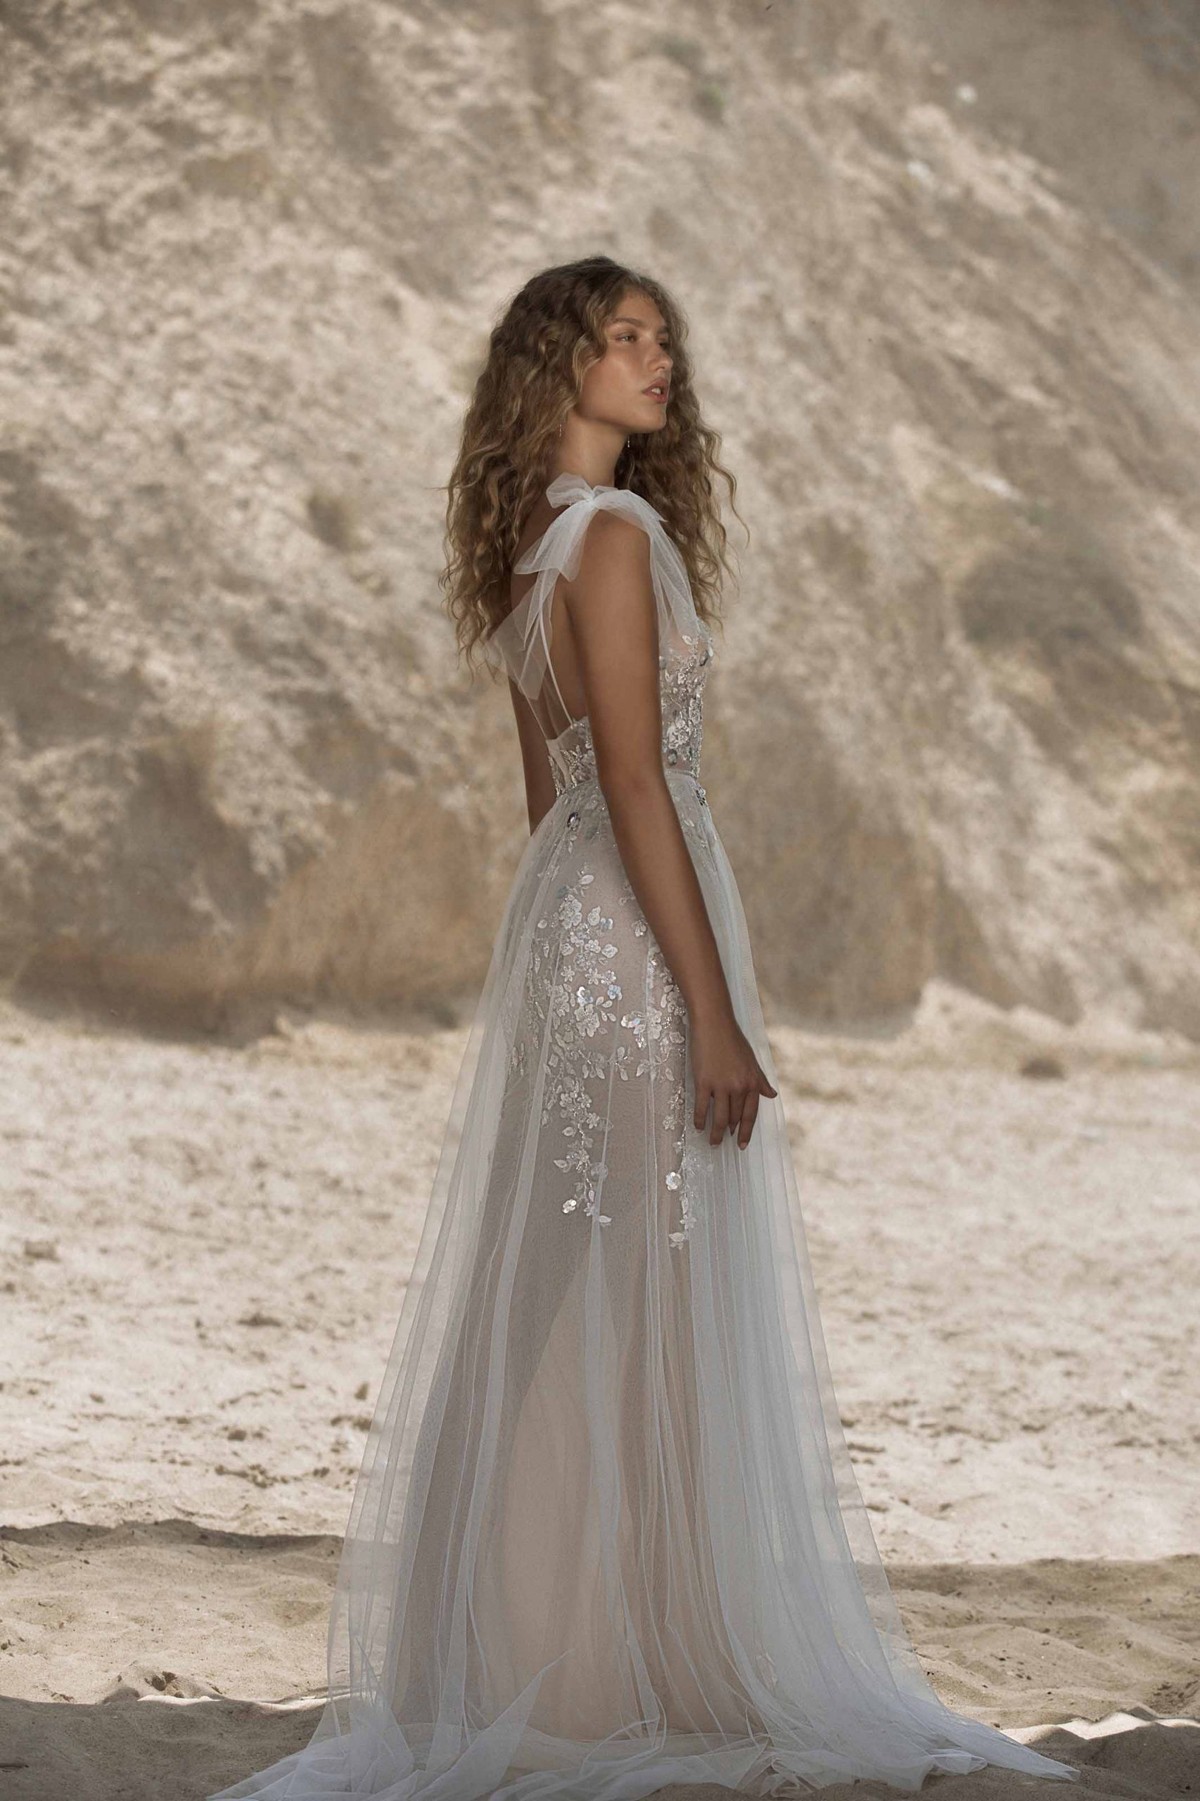 21-HANNA Bridal Dress Inspirated By Berta Muse 2021 Vista Mare Collection